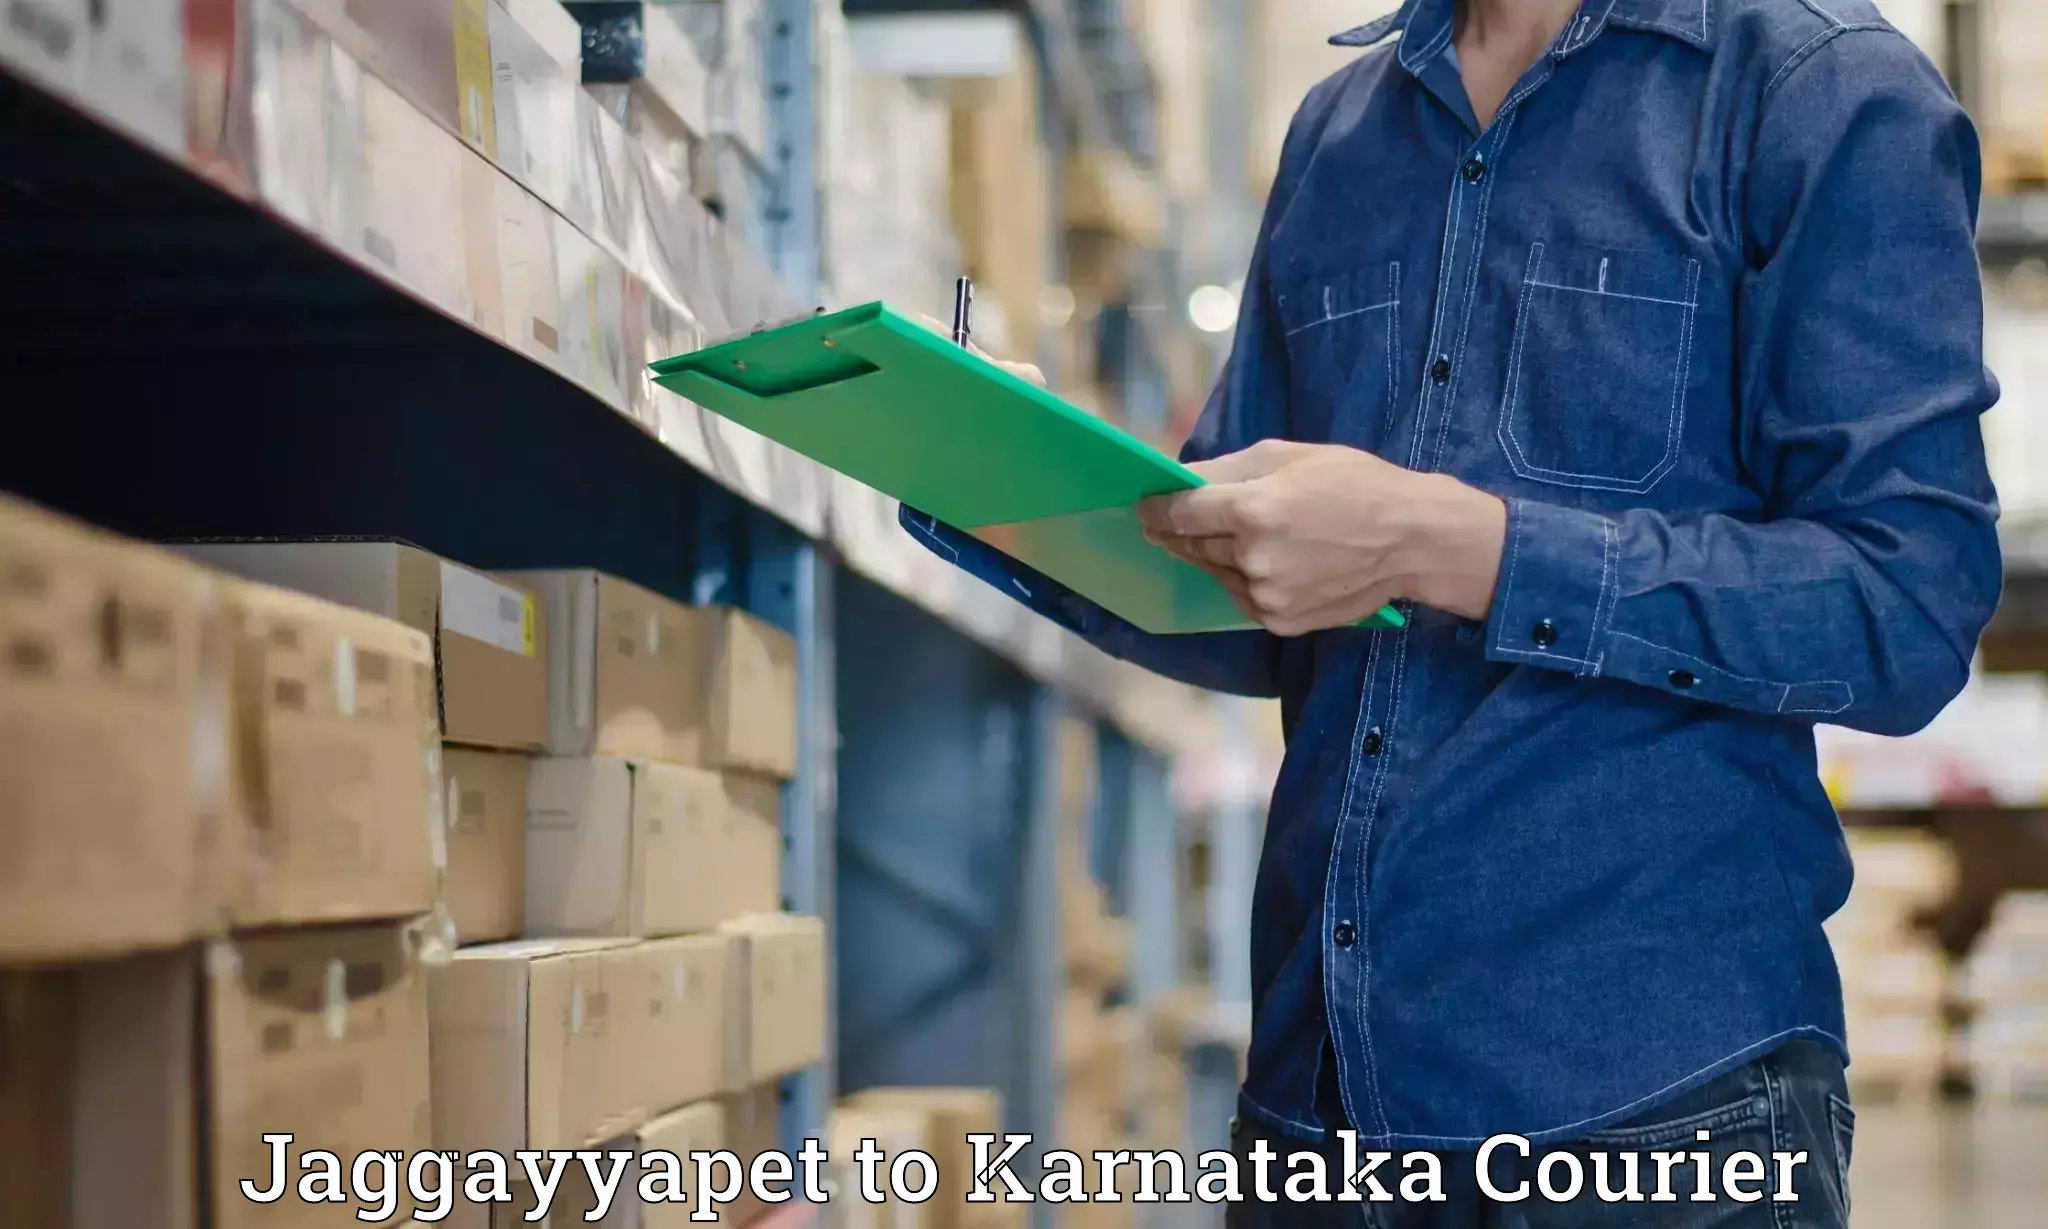 Courier app Jaggayyapet to Dharwad